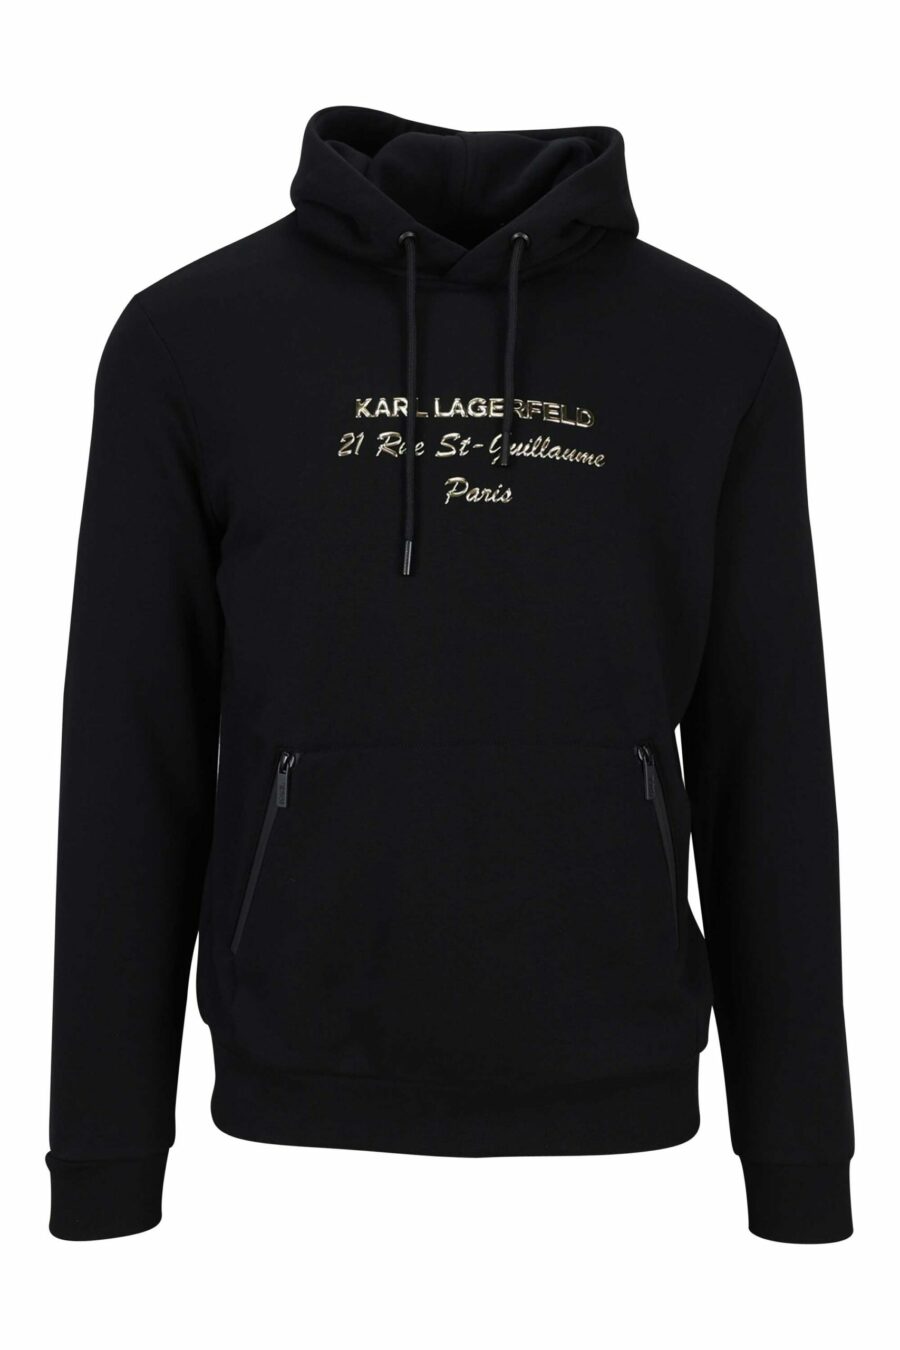 Black hooded sweatshirt with "rue st guillaume" logo in gold lettering - 4062226648967 1 scaled